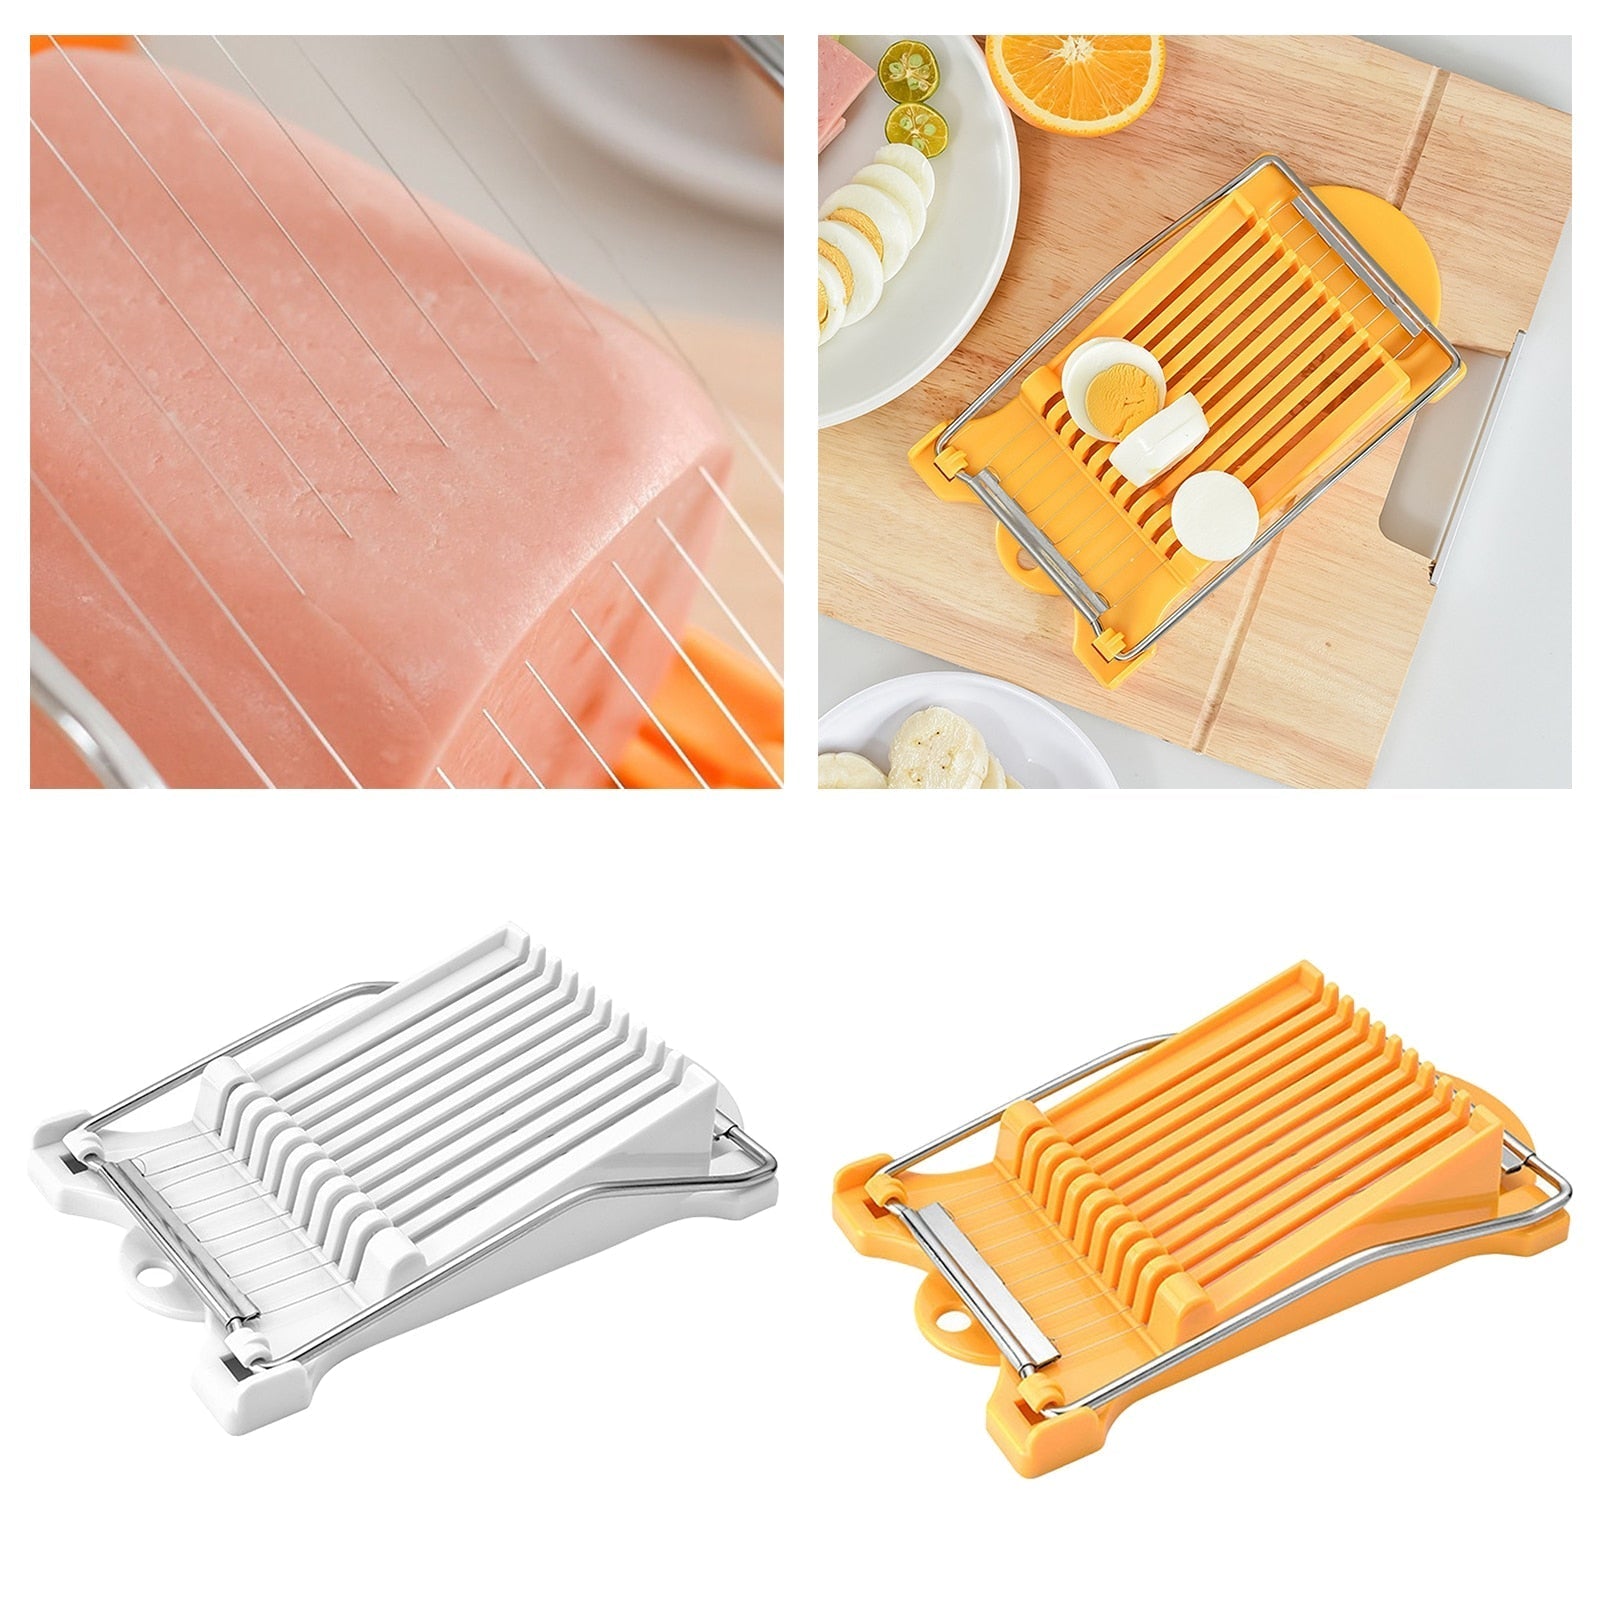 Spam/Luncheon Meat Wire Slicer